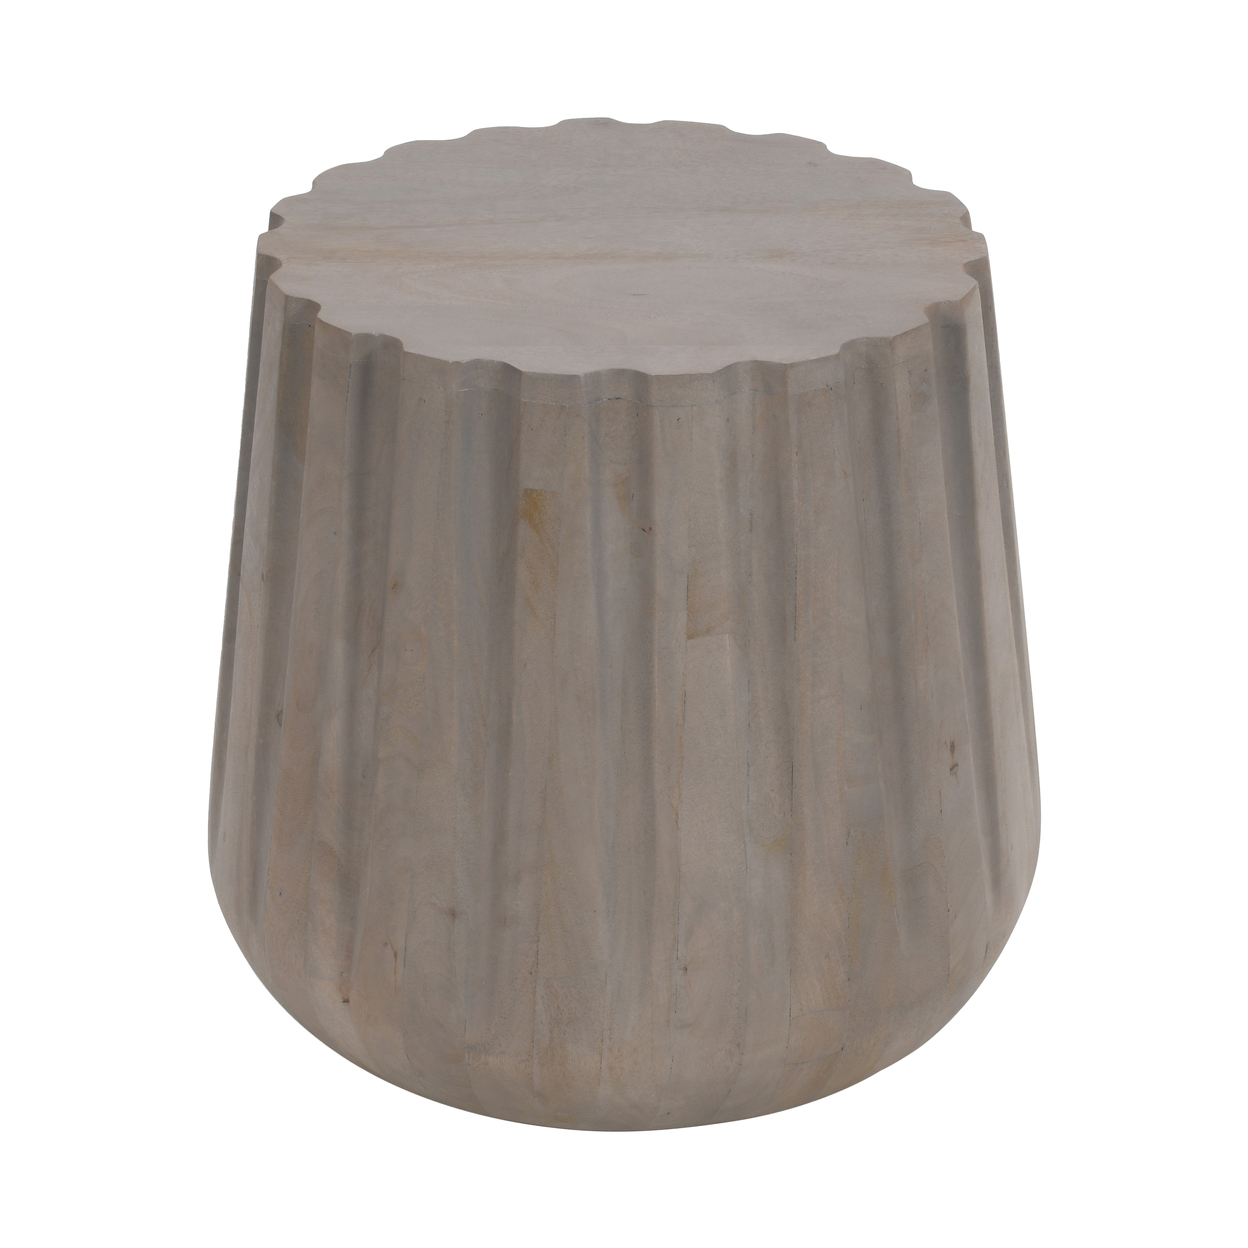 22 Inch Side End Table, Mango Wood Drum Shape With Handcrafted Grooved Edges, Gray - Saltoro Sherpi